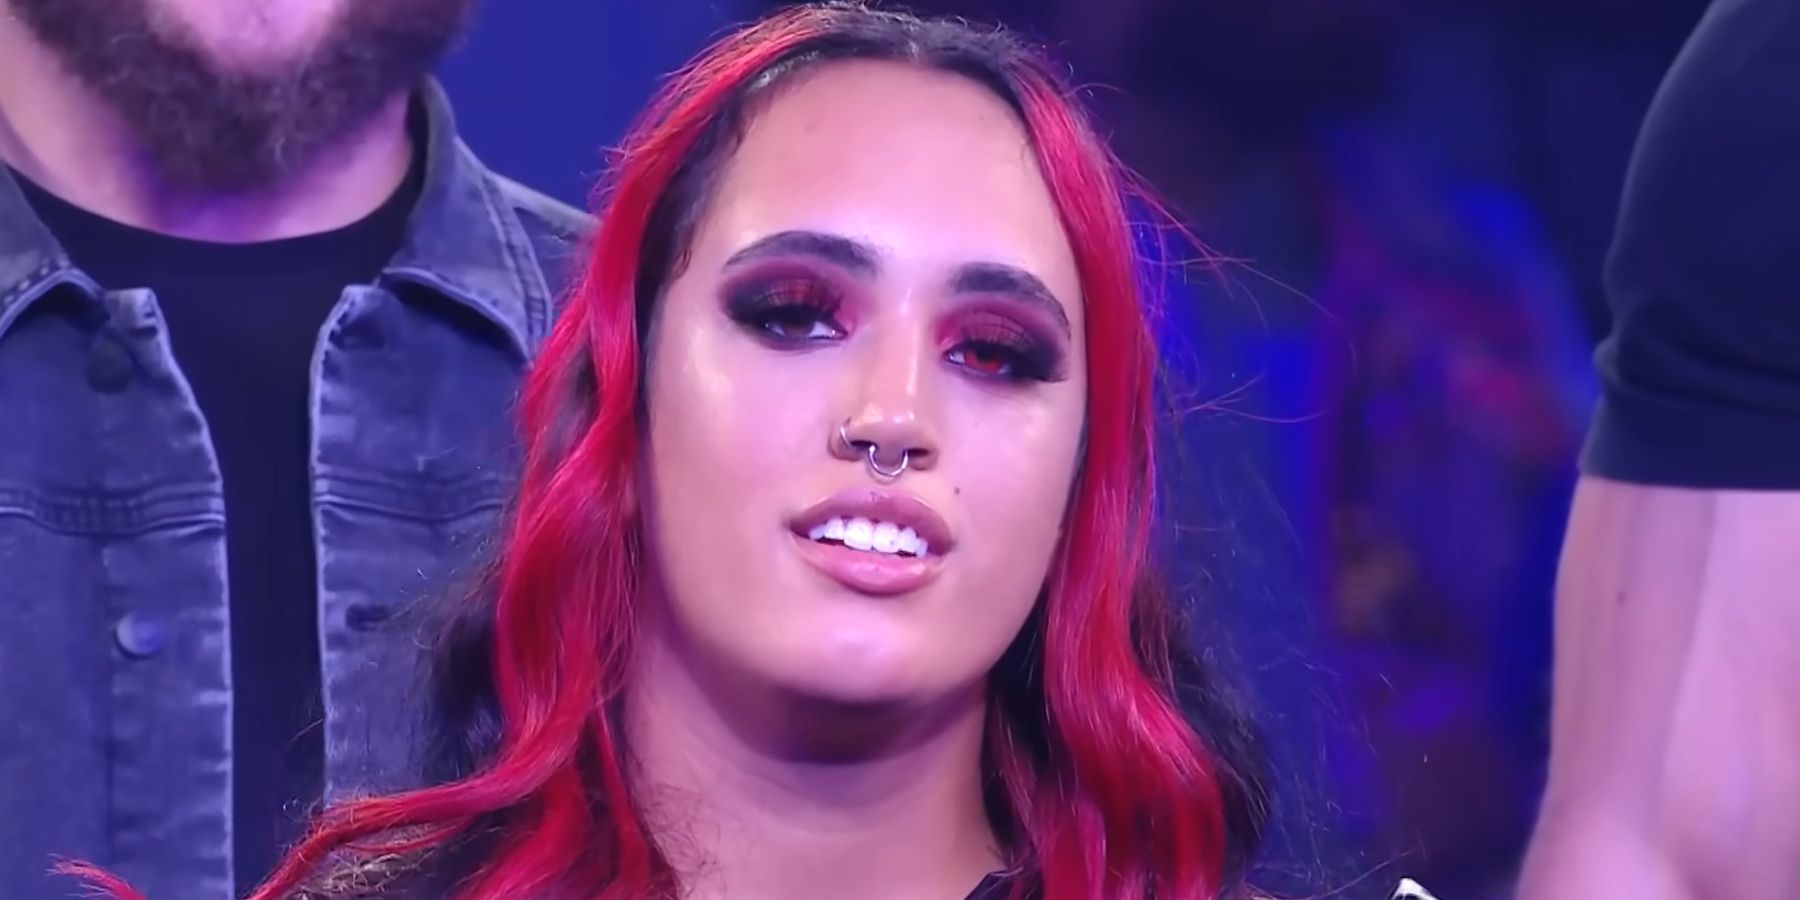 Ava Raine shocks fans in NXT by joining the Schism faction during her debut.